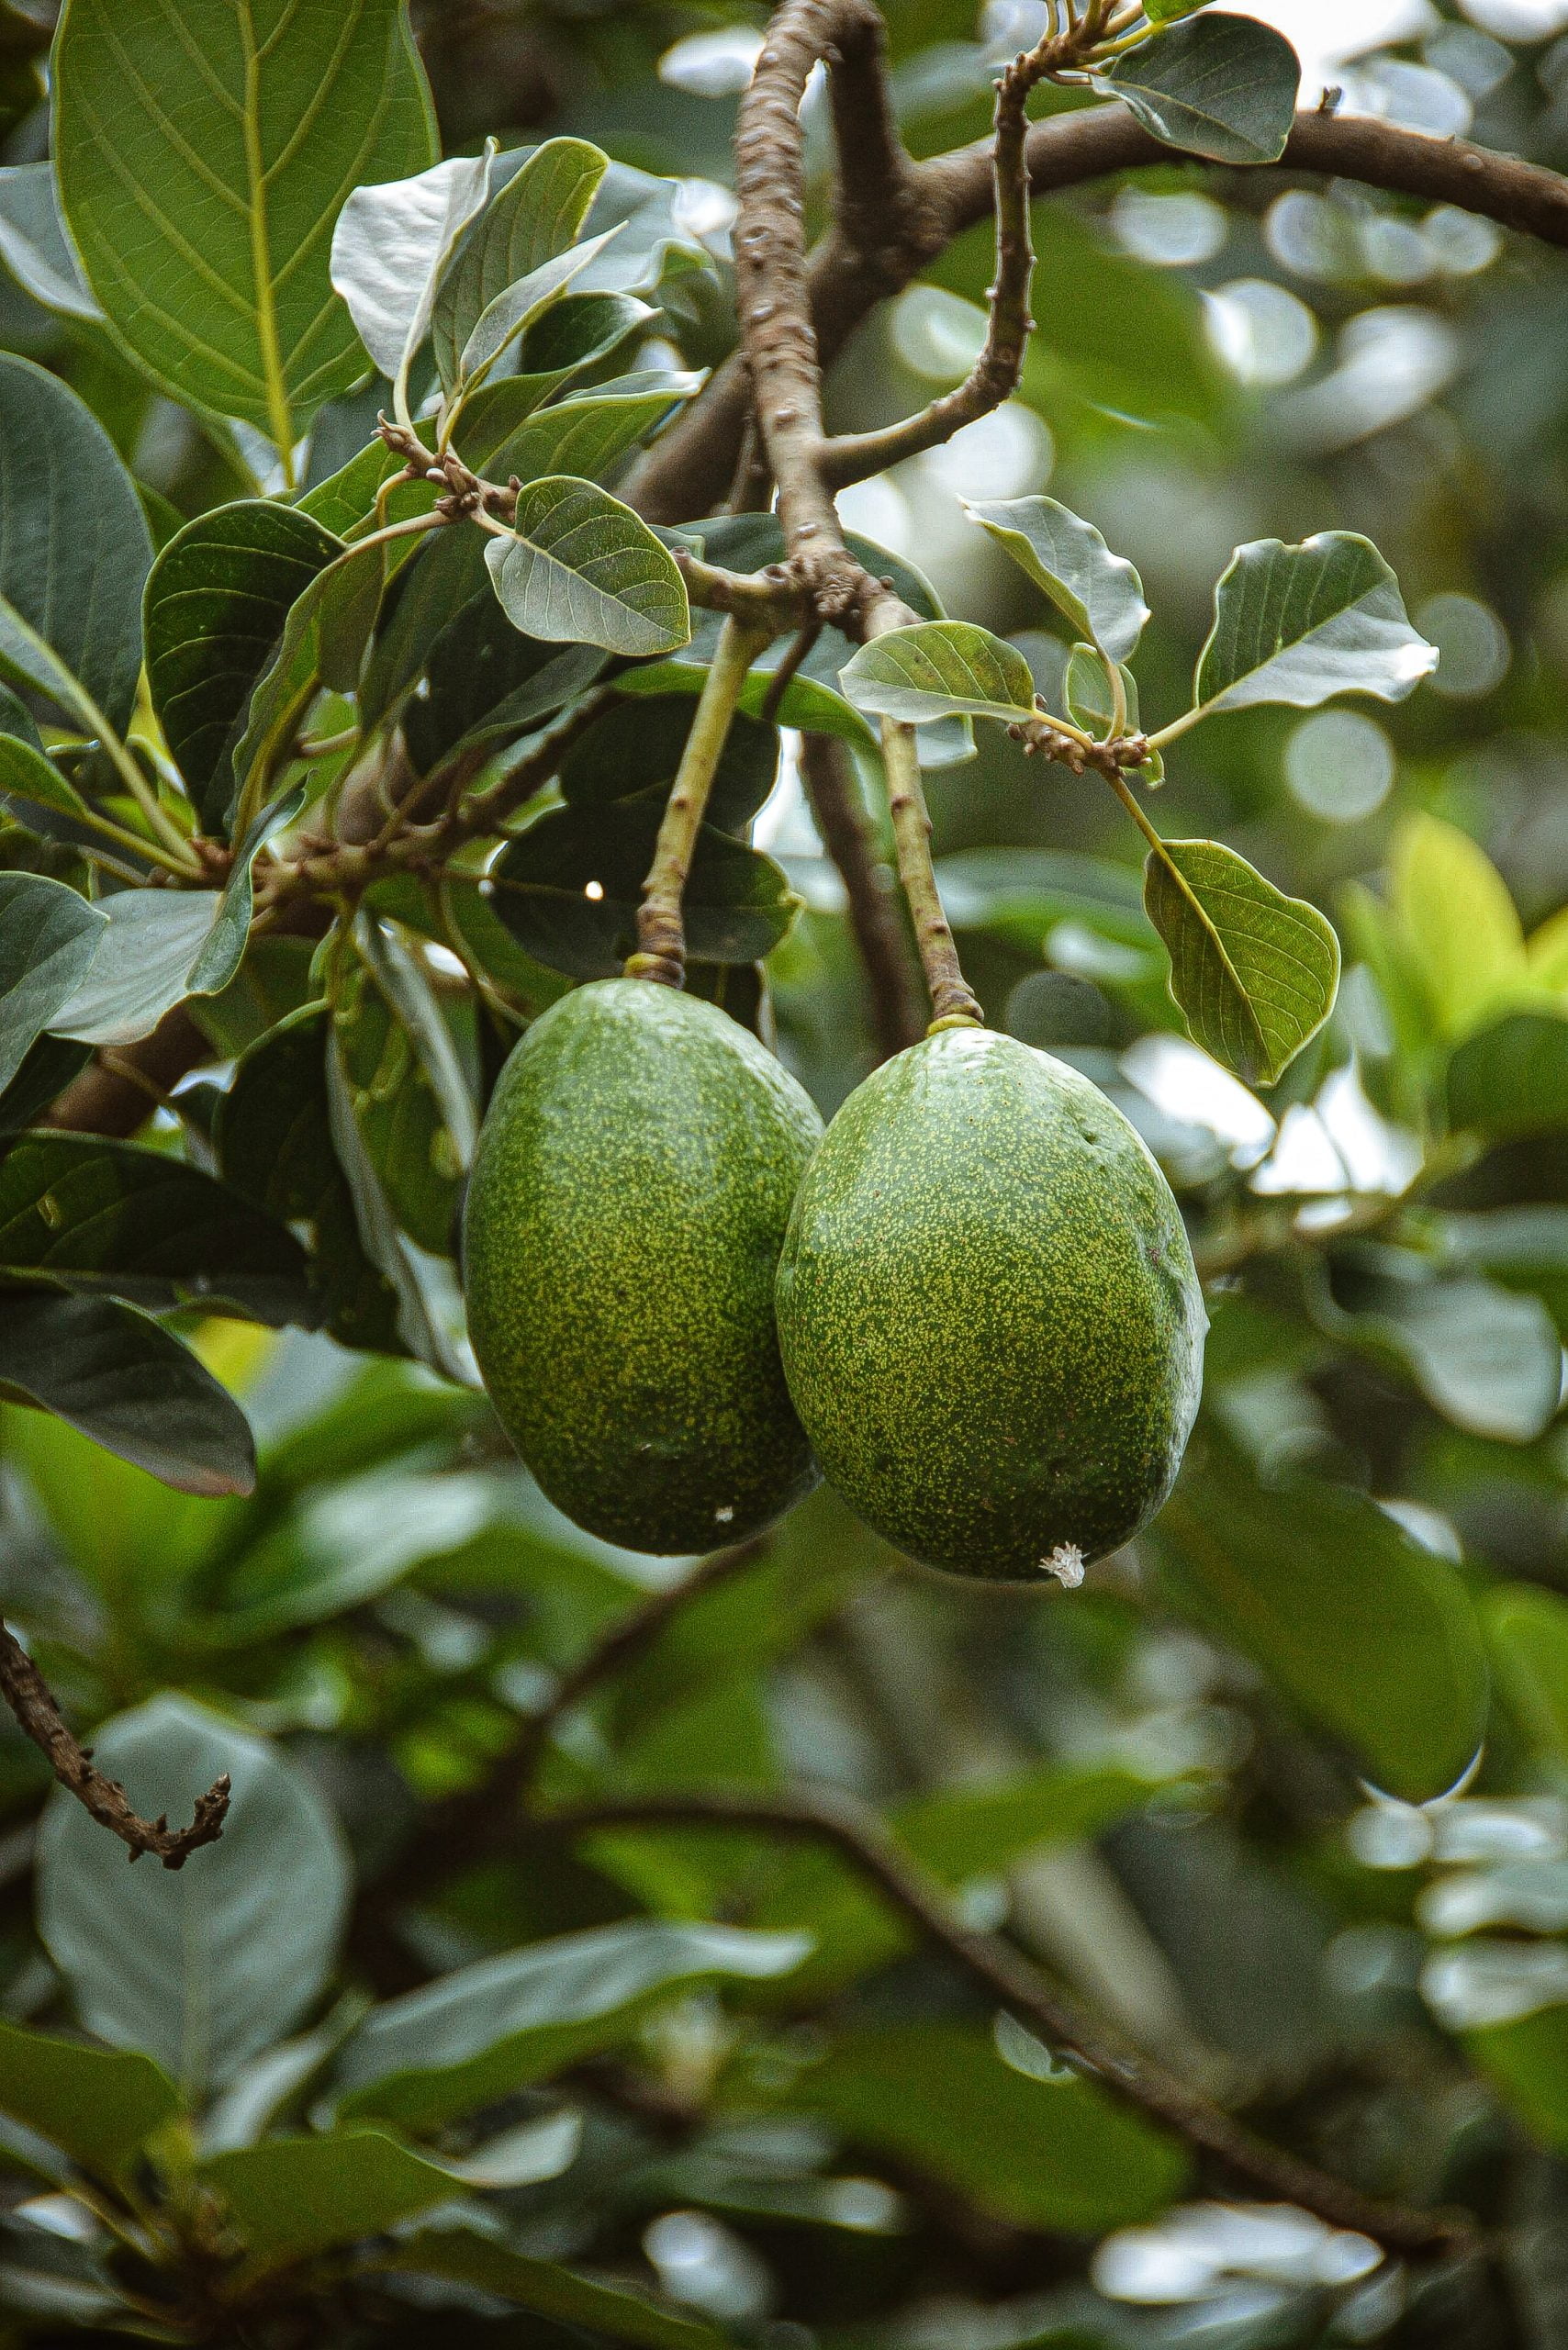 What Time Of Year Do Avocado Trees Bear Fruit?